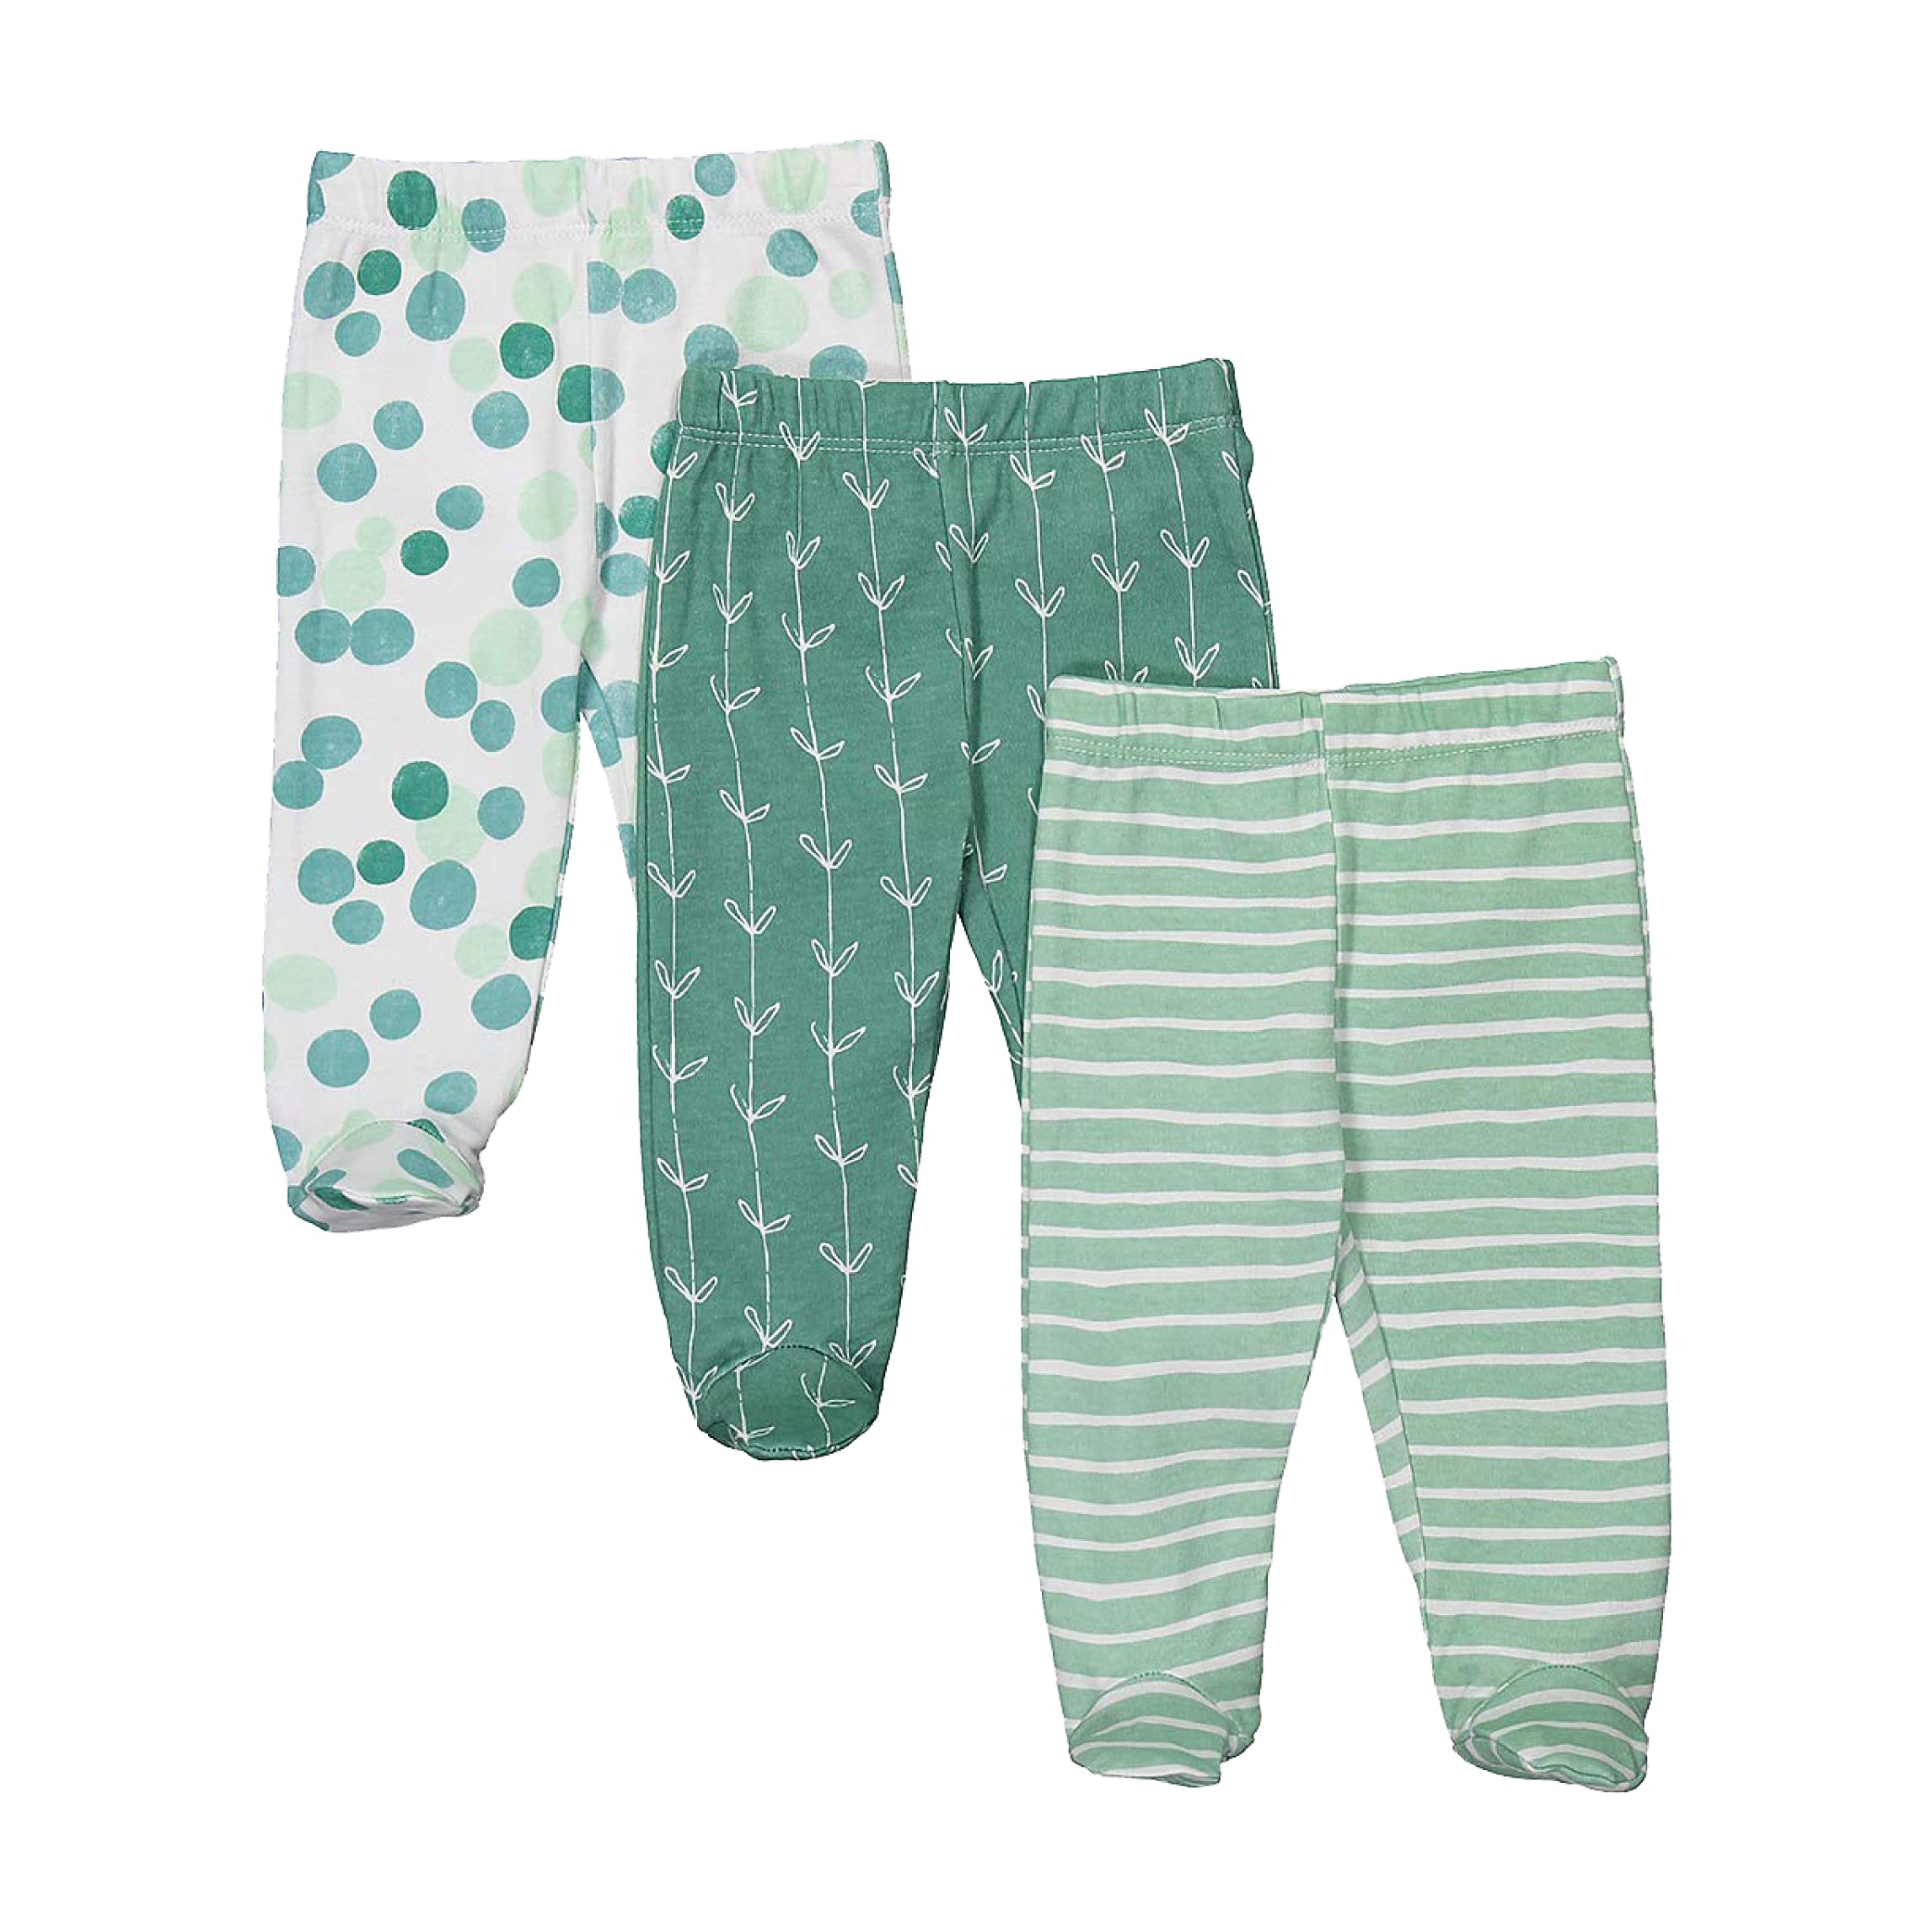 Spasilk Baby Boys' 3 Pack Cotton Pull on Footed Pants